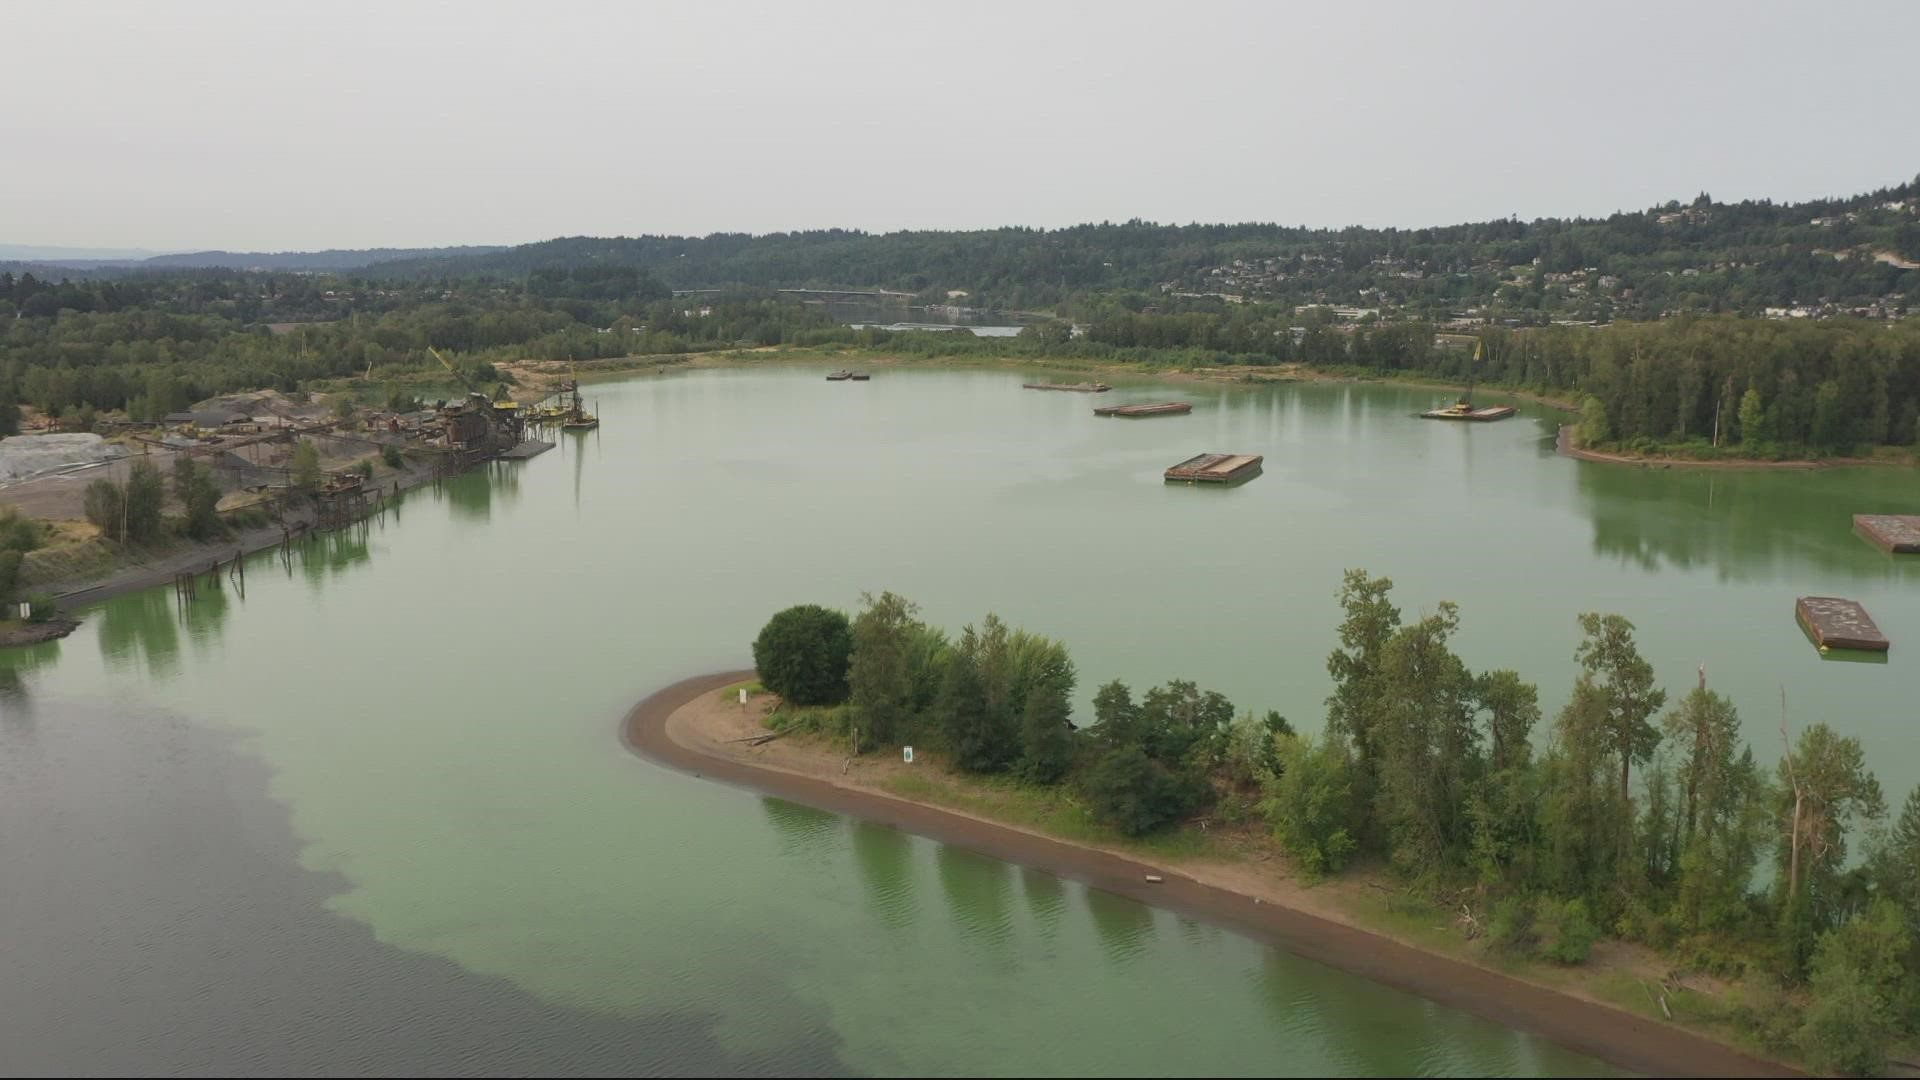 The Oregon DEQ and OHA are monitoring a blue-green algae bloom in the Willamette. Activists and scientists are looking at ways to prevent these blooms from happening